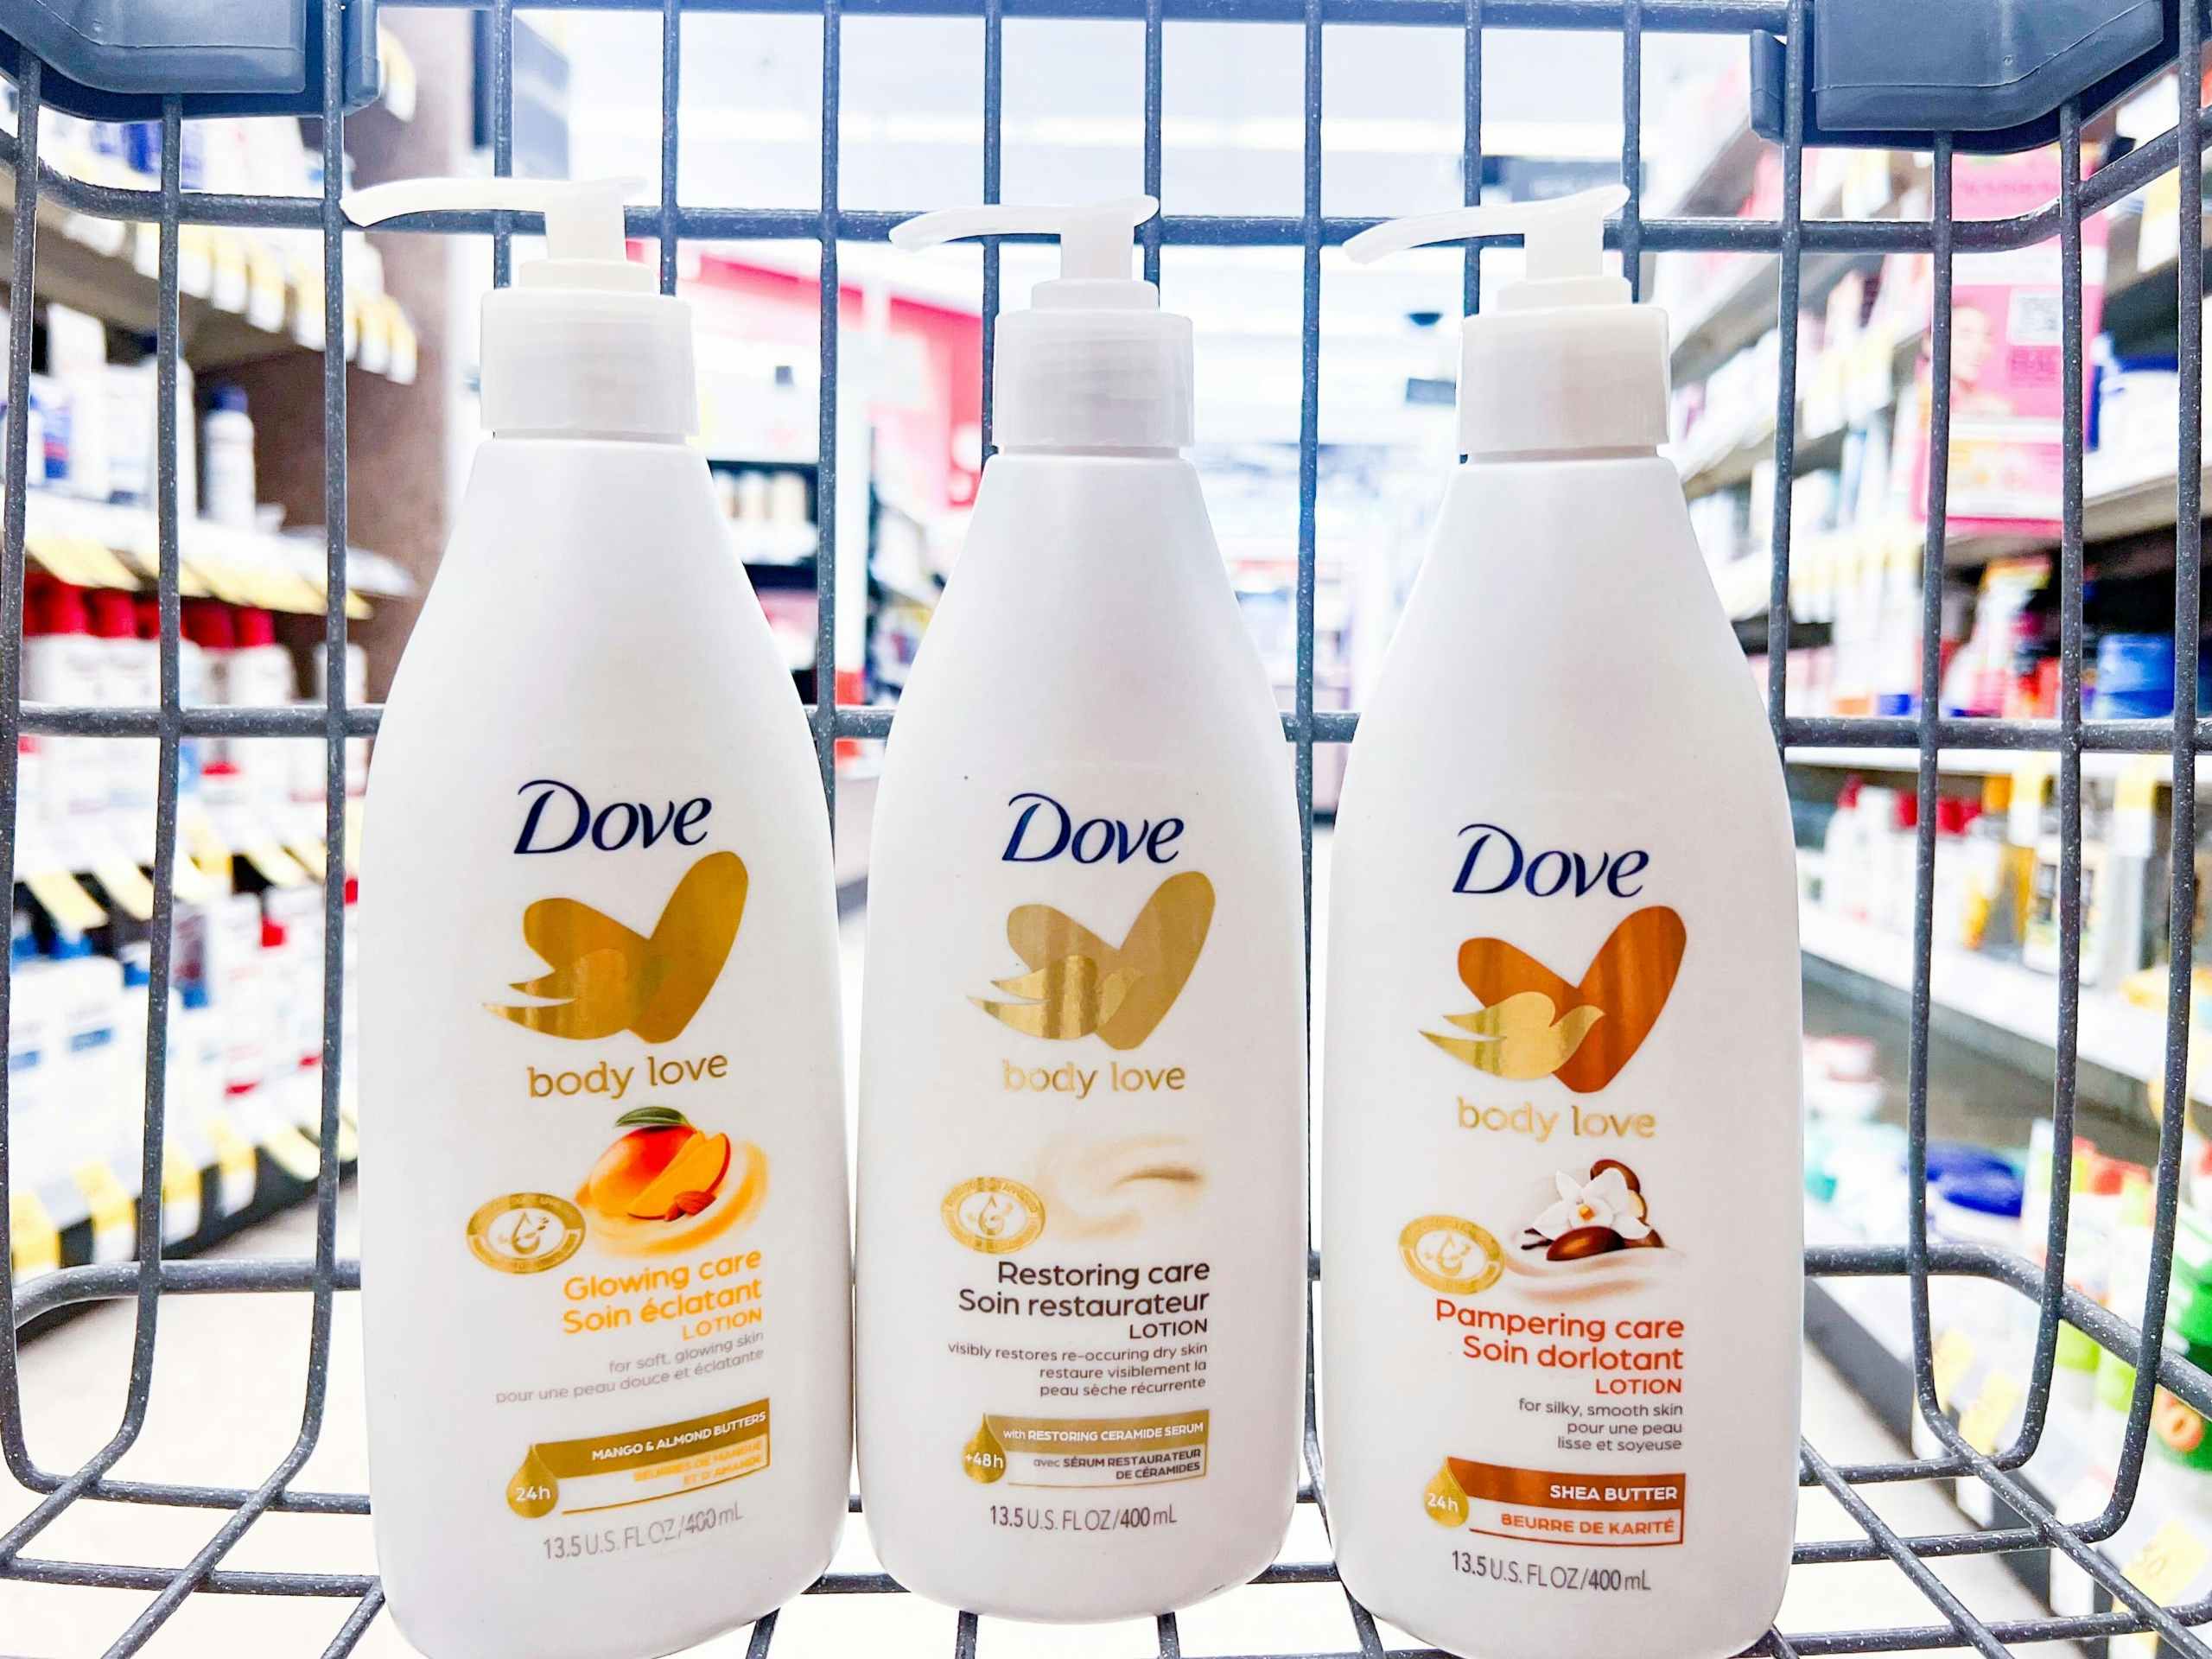 three bottles of dove love body lotion in shopping cart